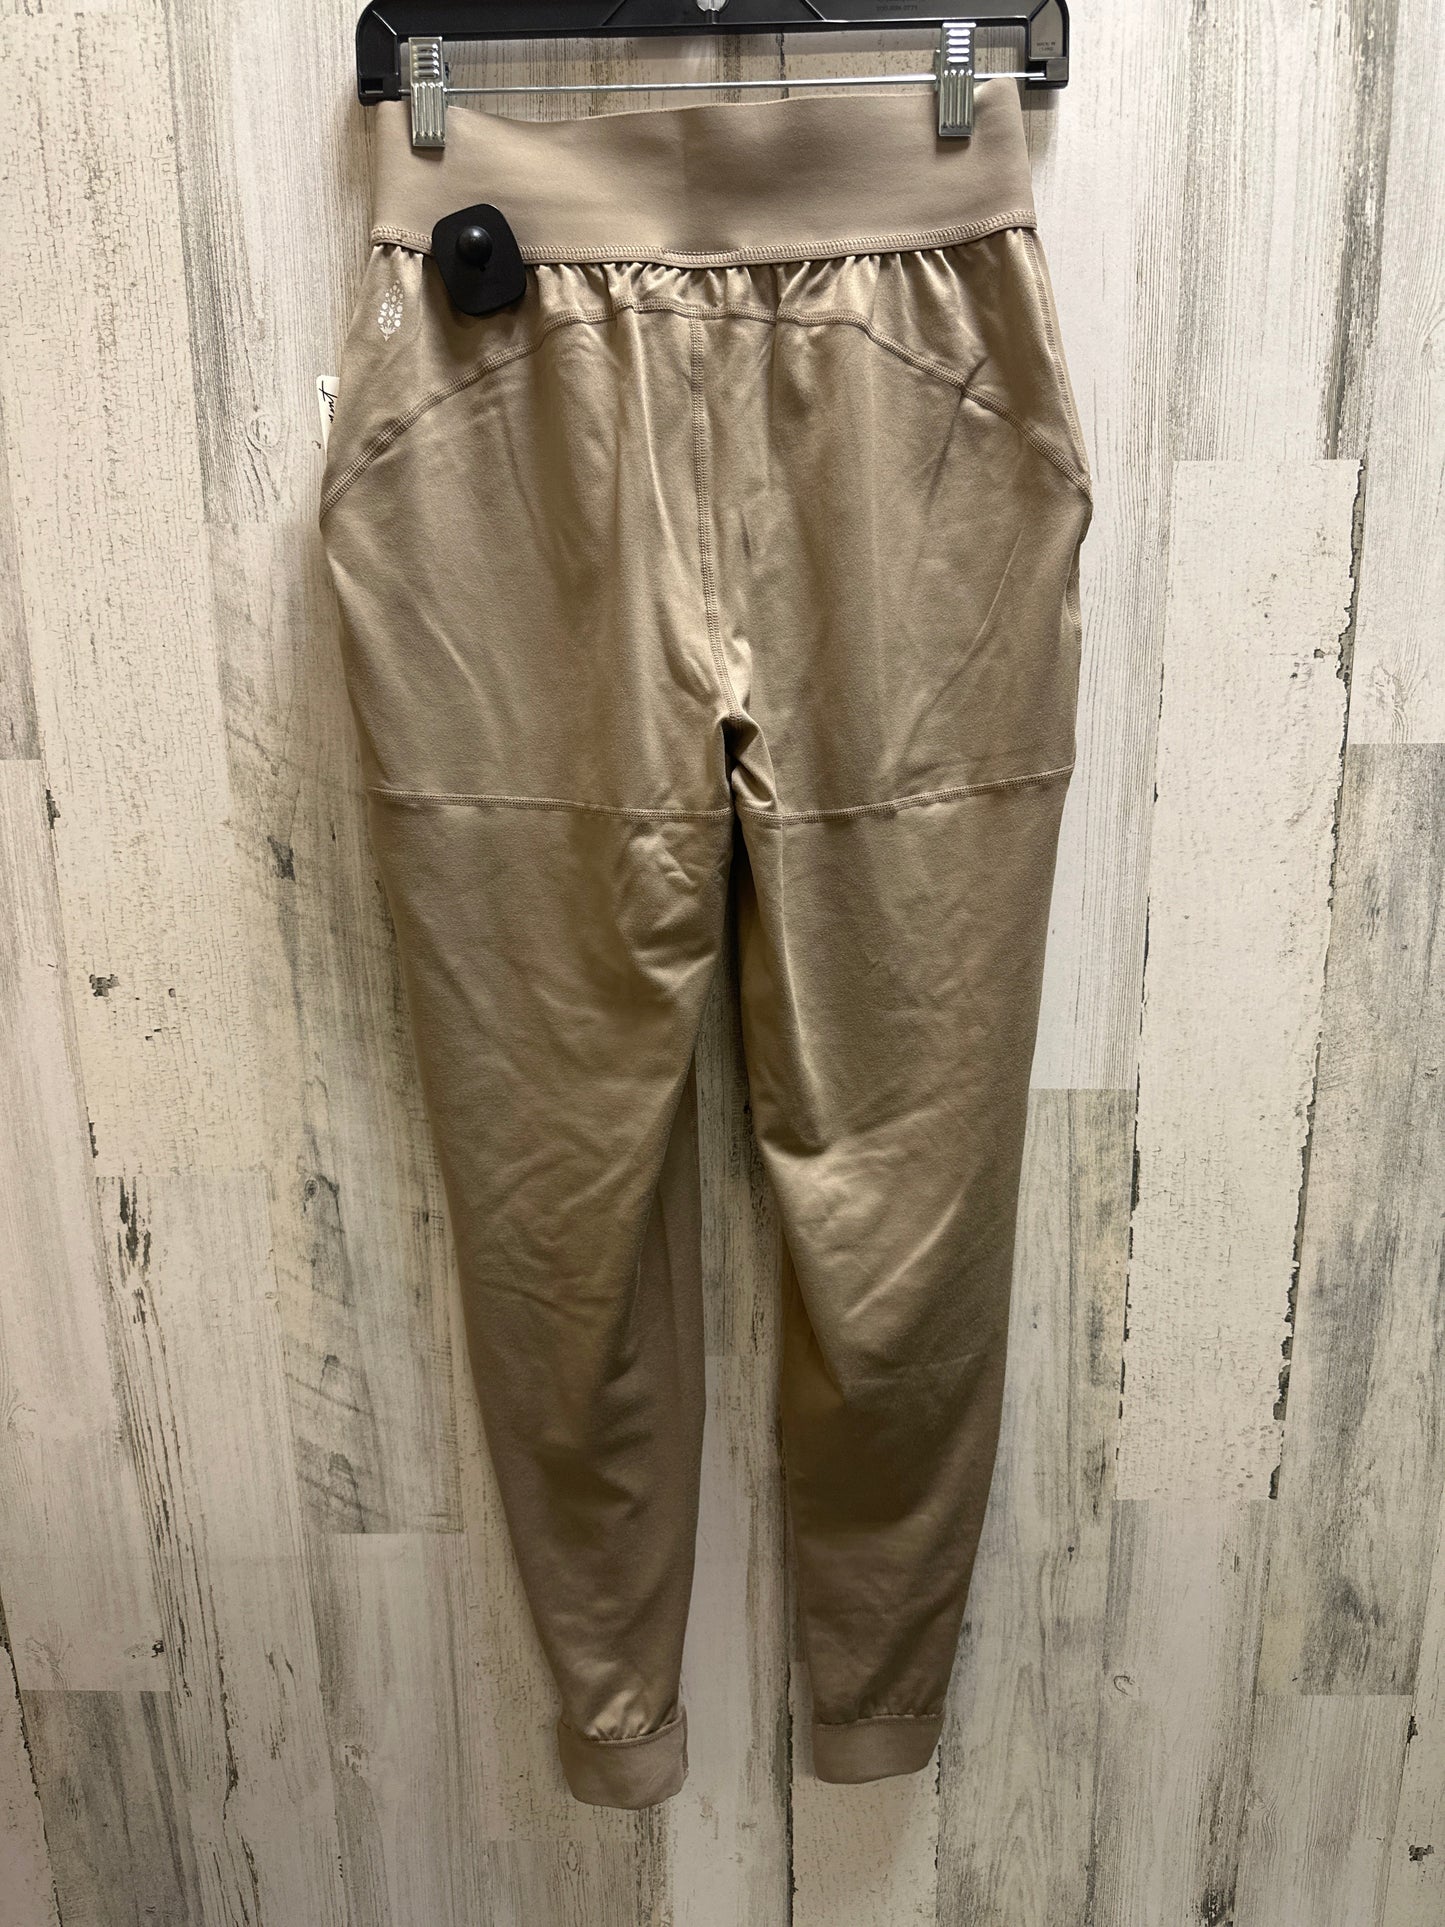 Brown Athletic Pants Free People, Size Xs